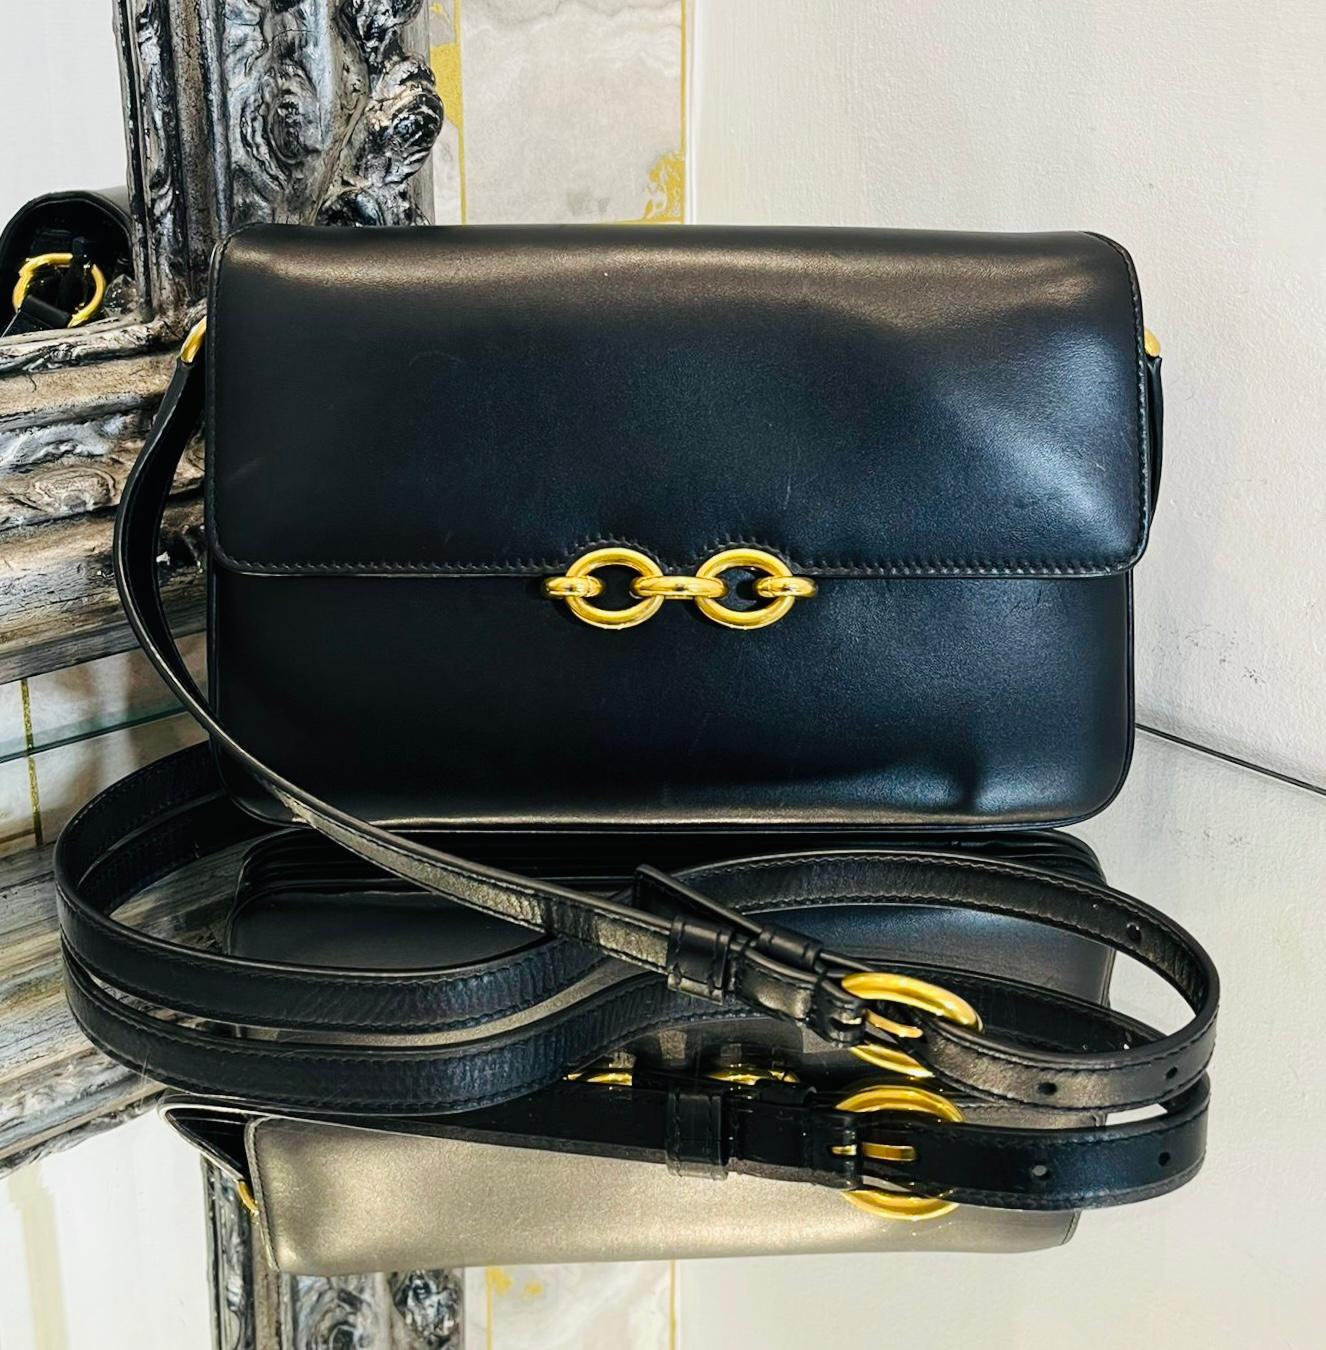 Saint Laurent Le Maillon Leather Satchel Crossbody Bag

Black bag designed with front flap and gold, magnetic chain link closure.

Detailed with adjustable shoulder strap with 'Saint Laurent' logo engraved buckle and leather interior featuring zip